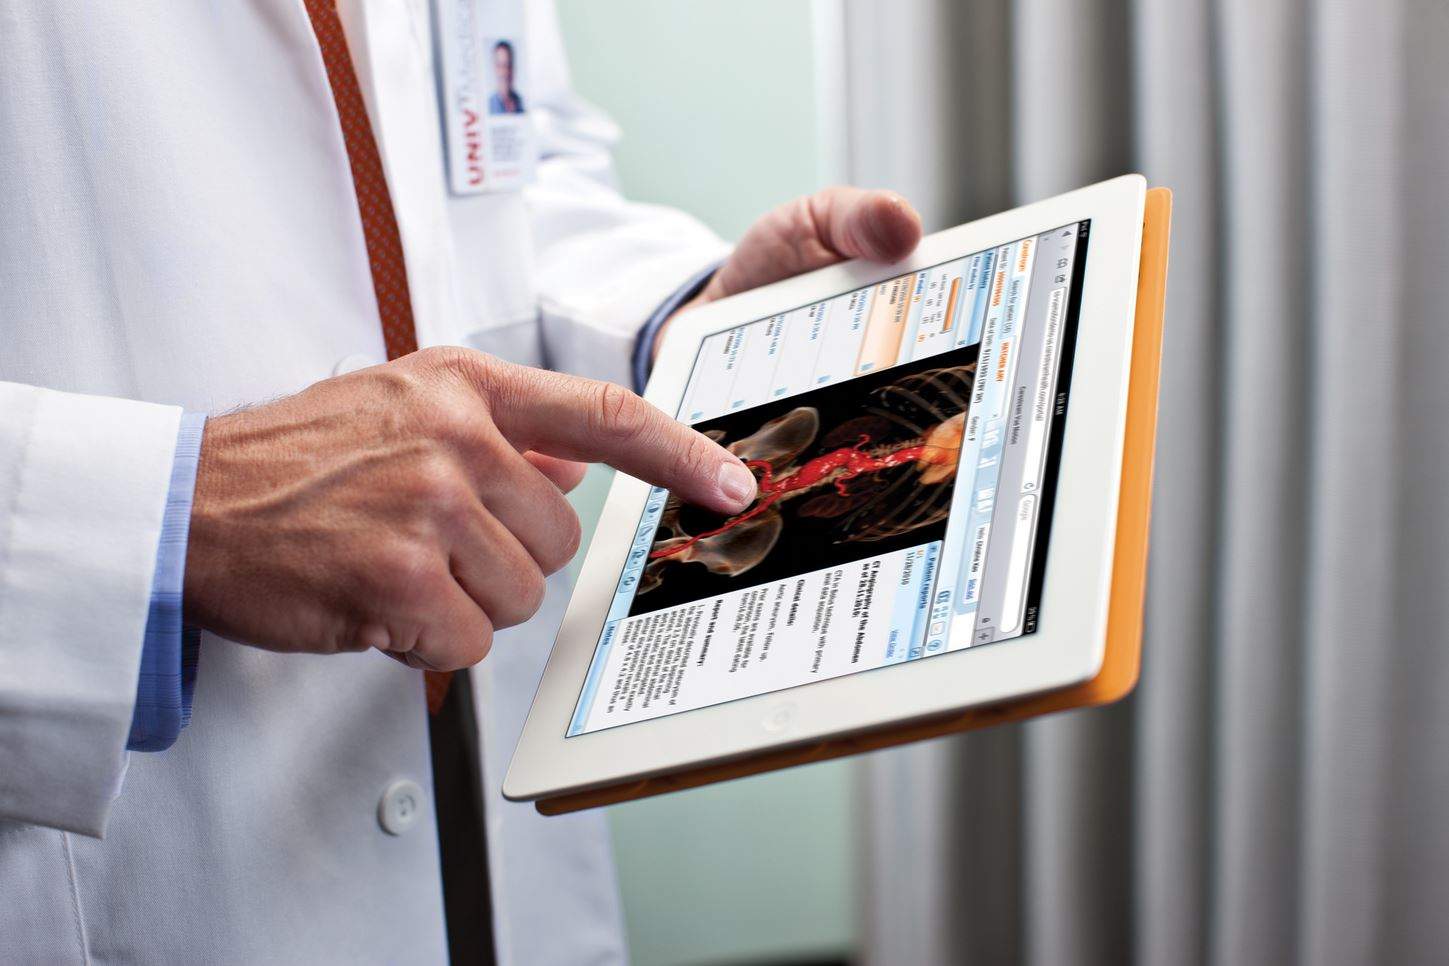 4 Simple Ways to Manage Patient Data More Efficiently